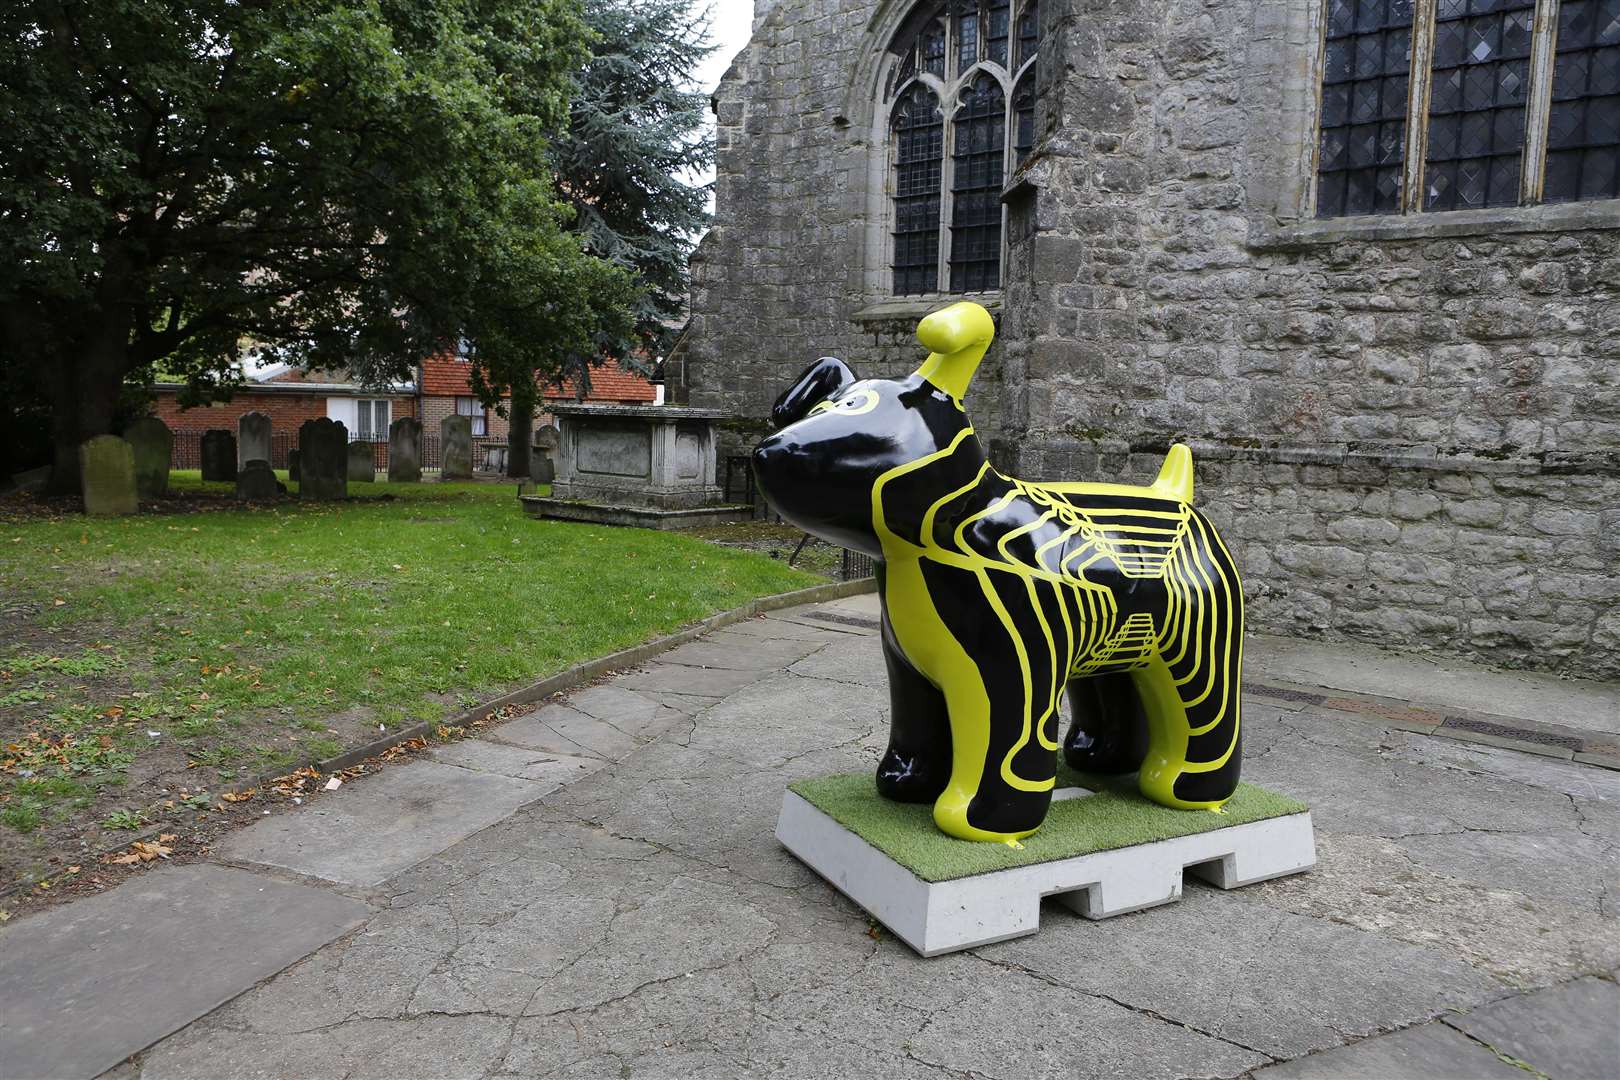 The Infinity Dog was previously within the church grounds. Picture: Andy Jones